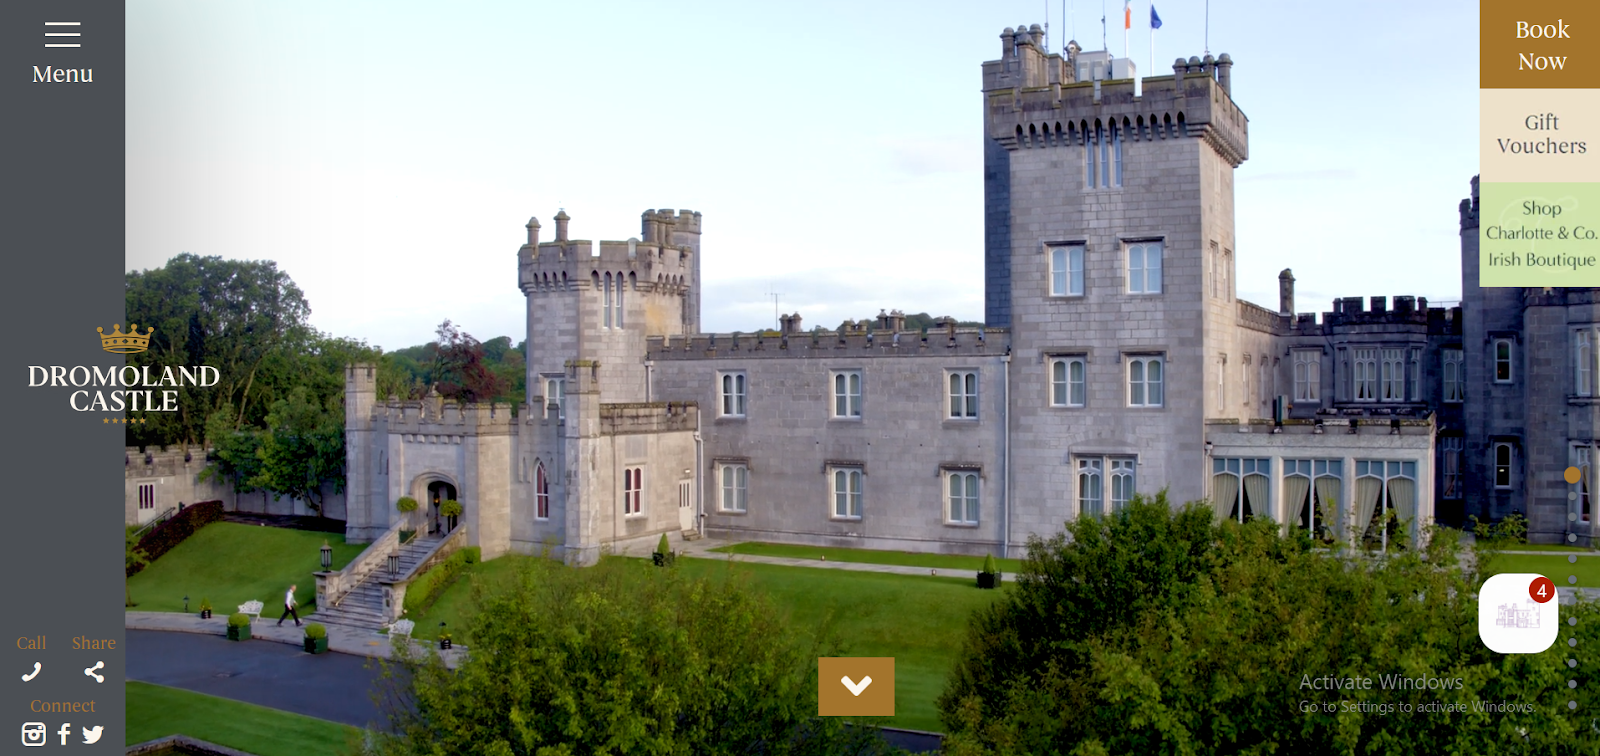 video as background image css example from dromoland castle